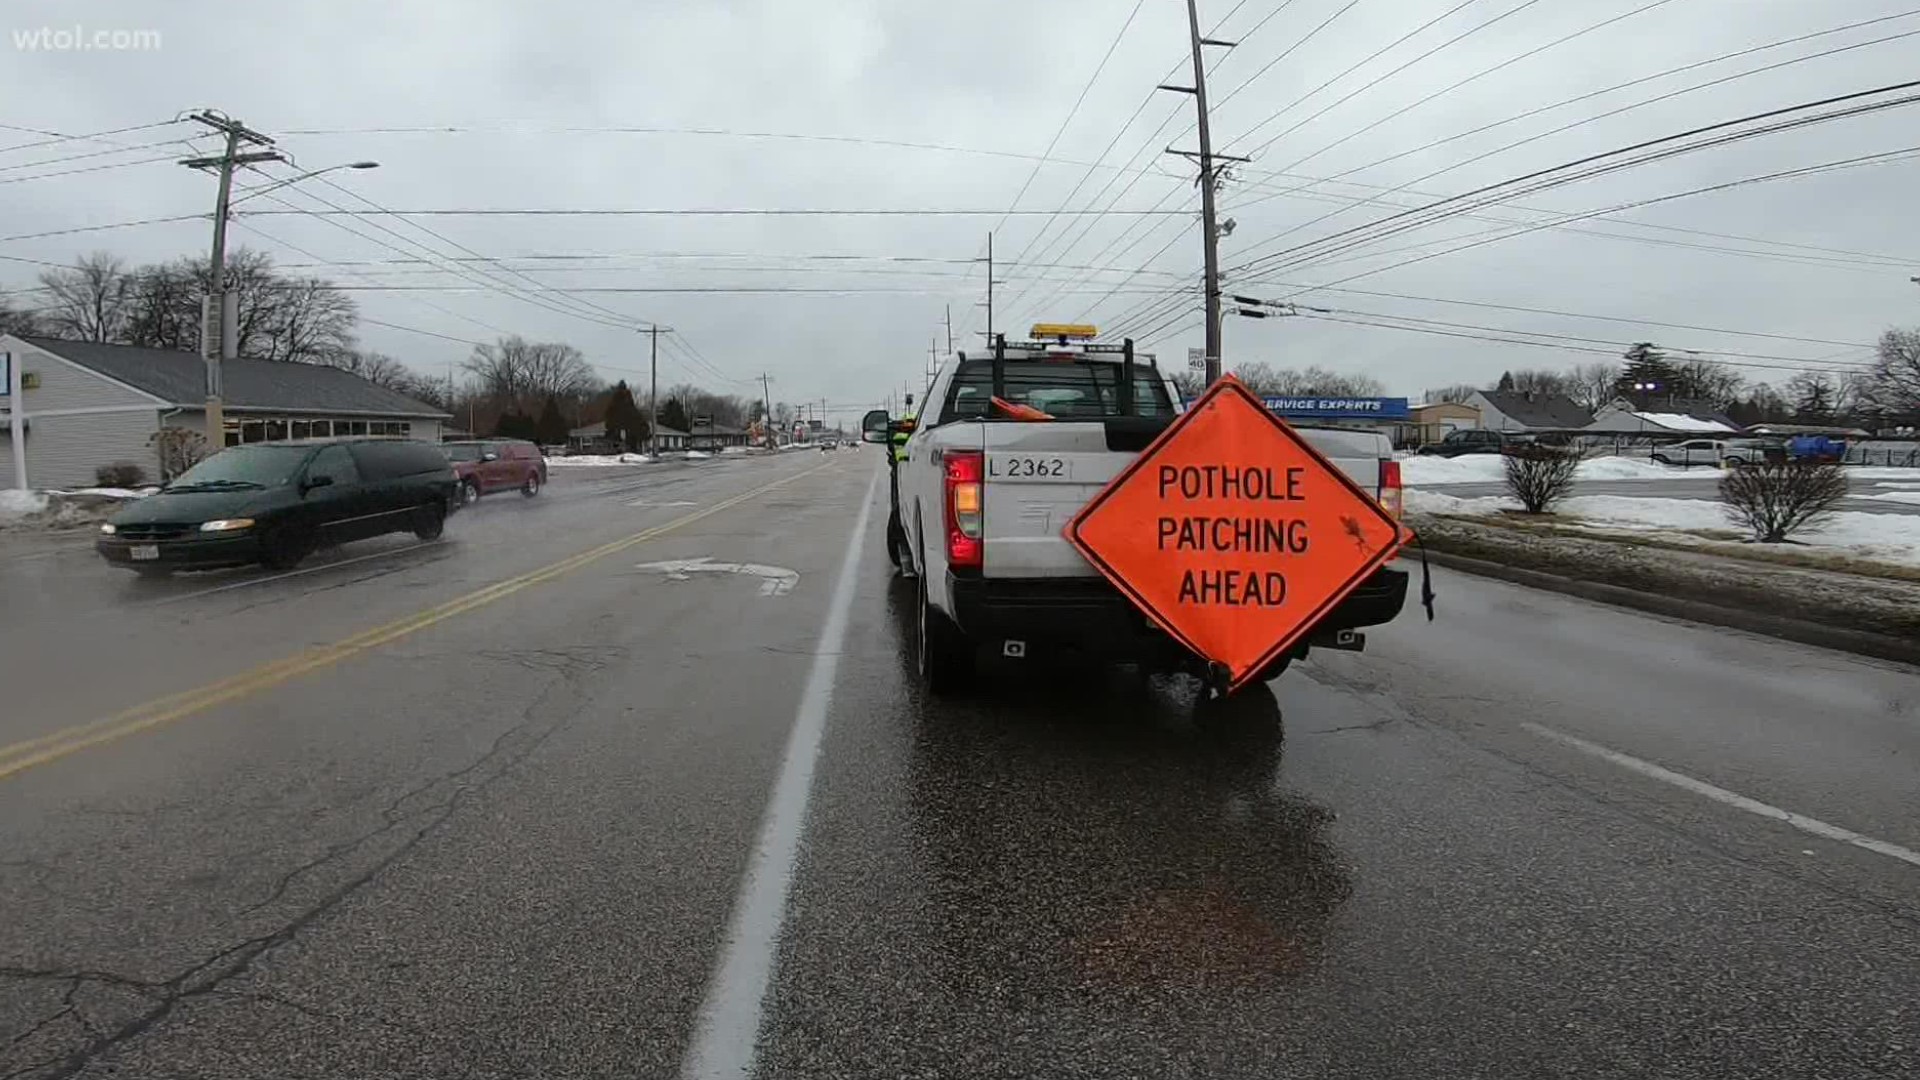 City officials are doubling pothole crews heading out to patch holes created by the seasonal freeze-thaw cycle.